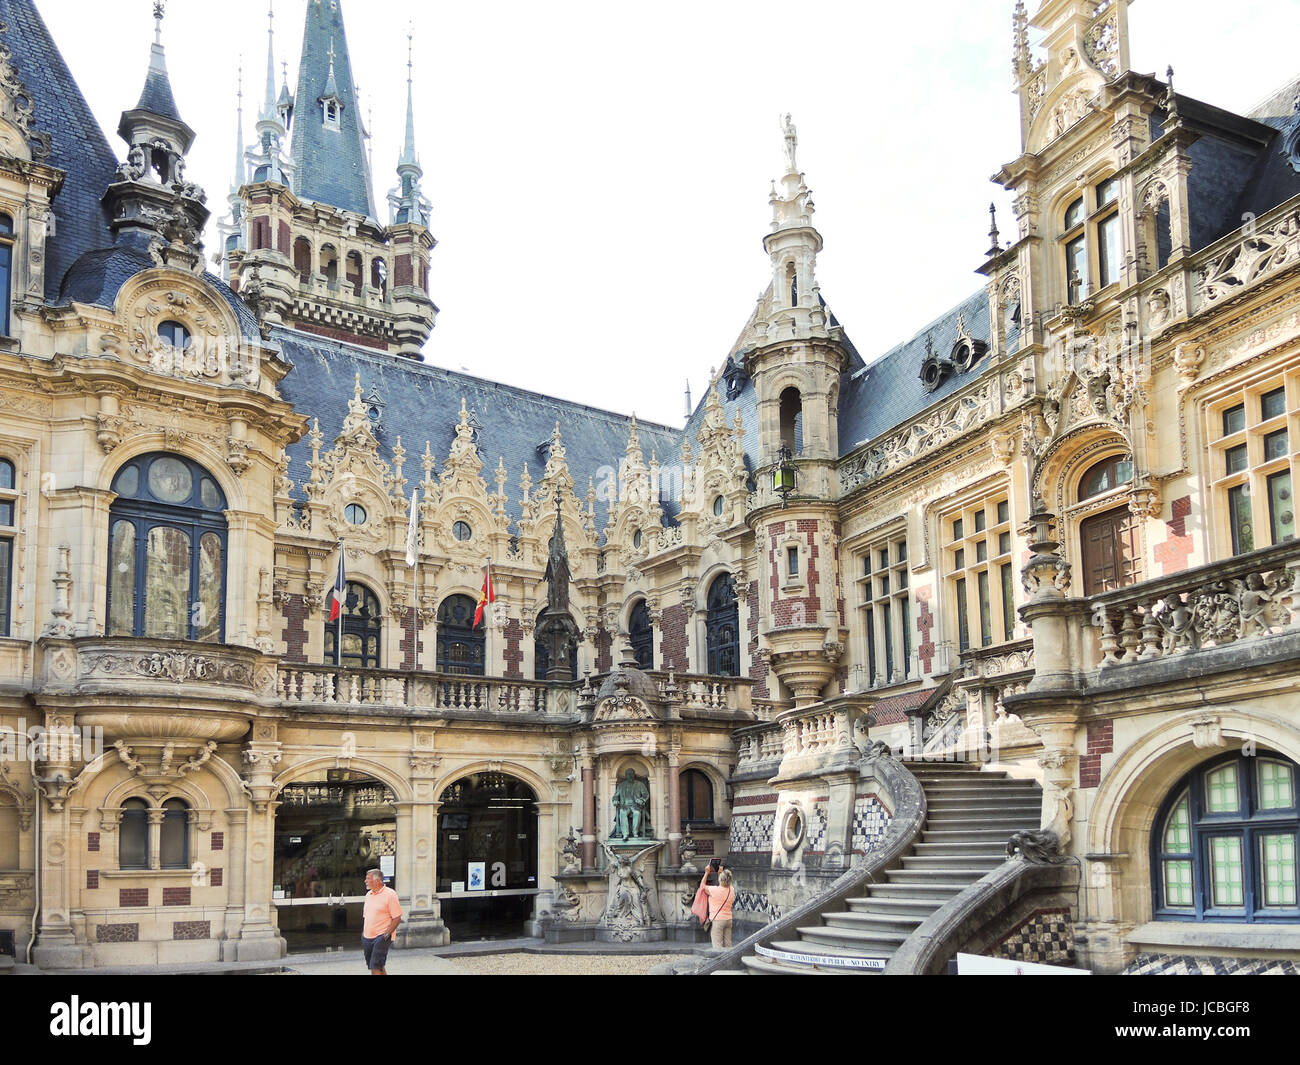 FECAMP, FRANCE - AUGUST 4, 2014: Benedictine Palace in Fecamp town, France. The Palais de la Benedictine is florid building dating from 1892 that mixes neo-Gothic and Renaissance styles. Stock Photo